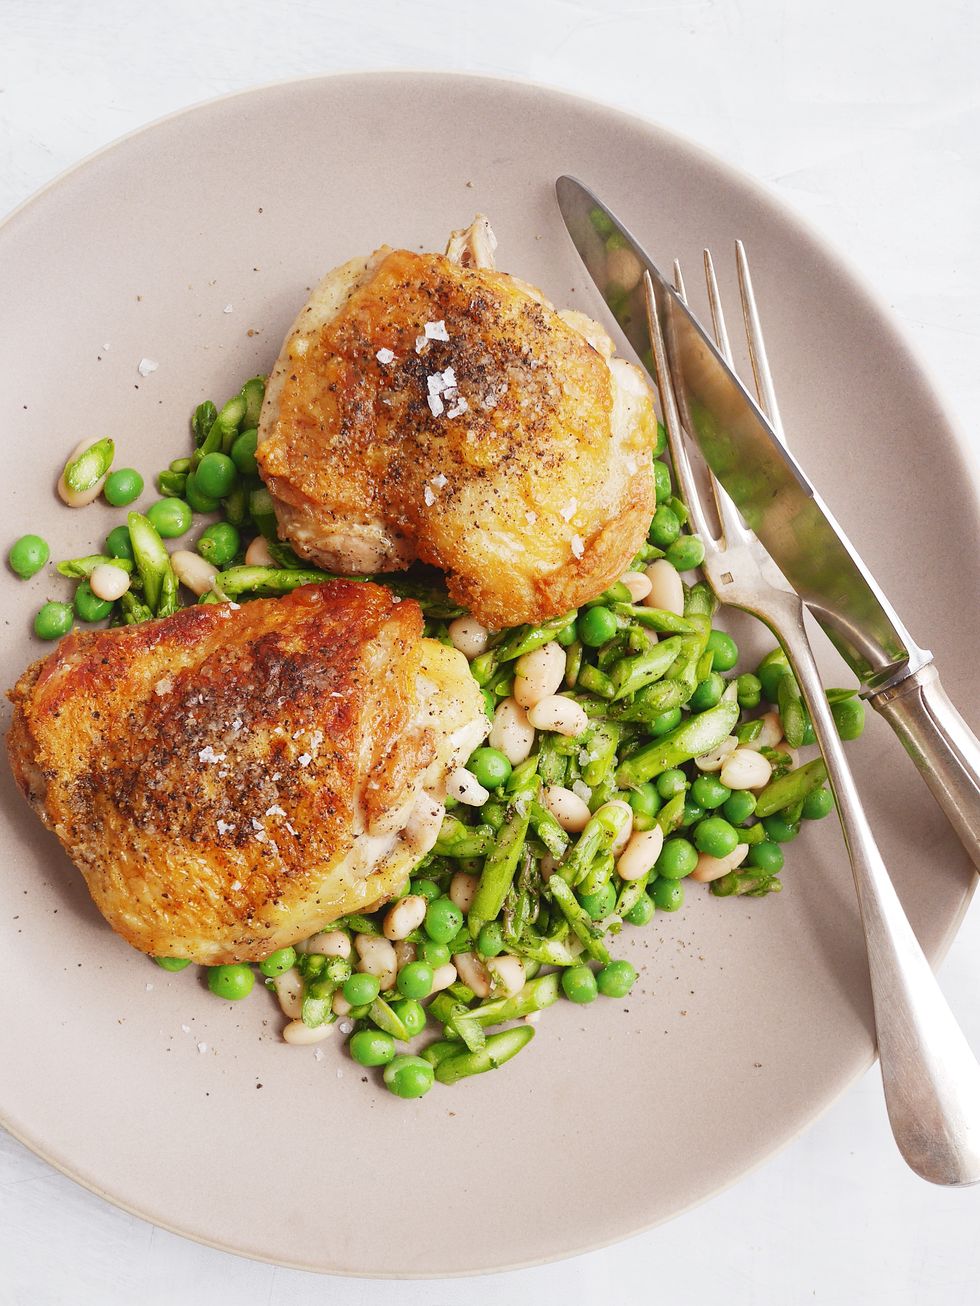 The Ingenious Trick For The Crispiest Chicken Thighs You'll Ever Have